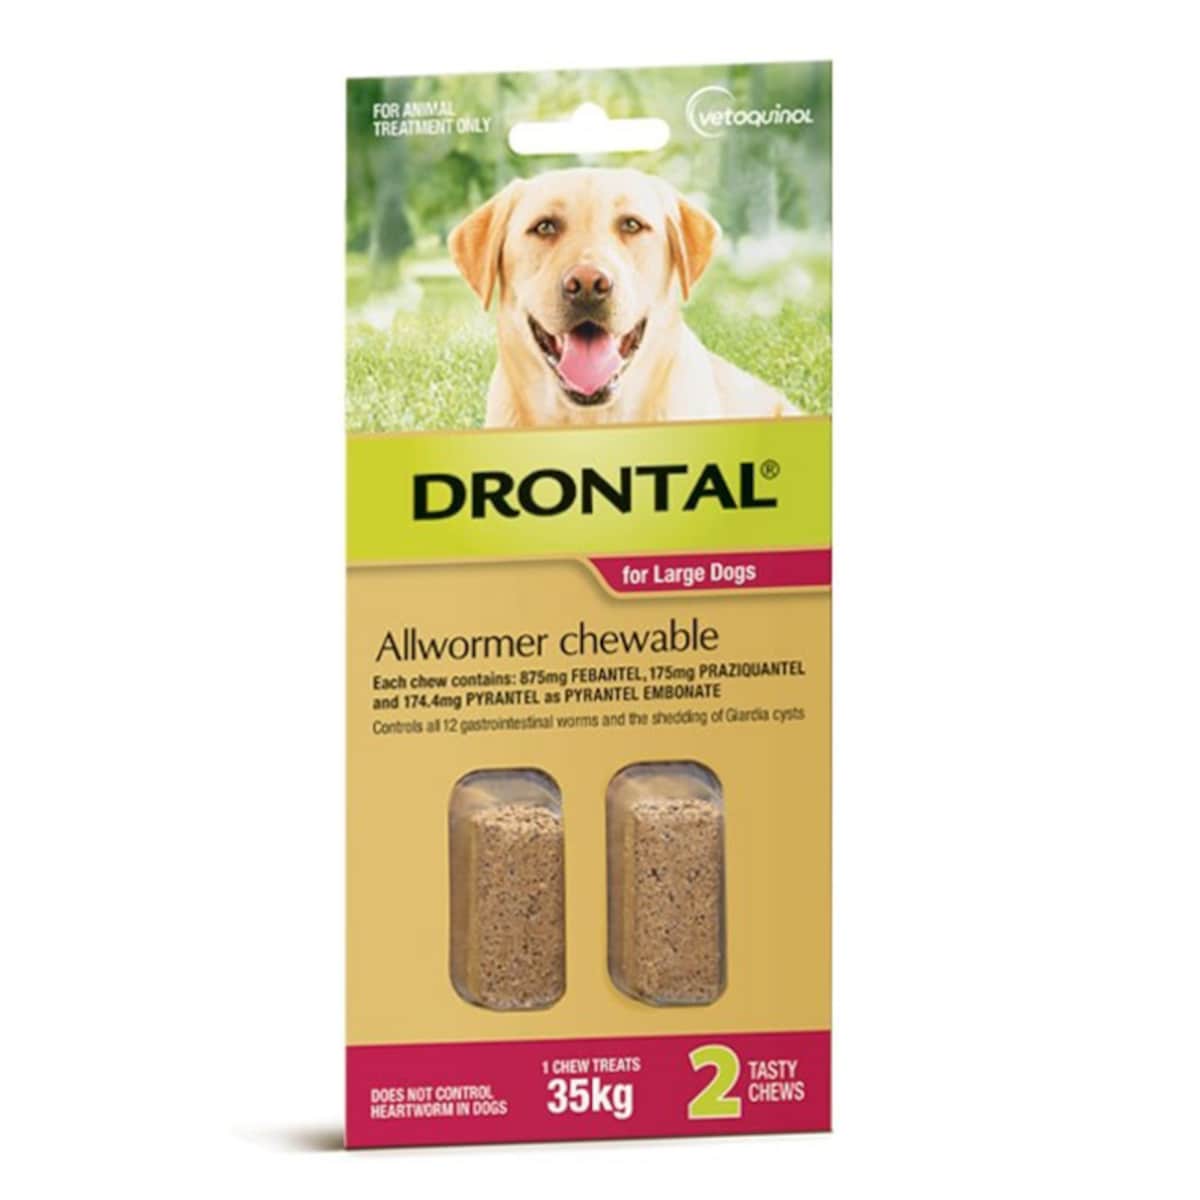 Drontal Allwormer Chewable for Large Dogs 2 Chews